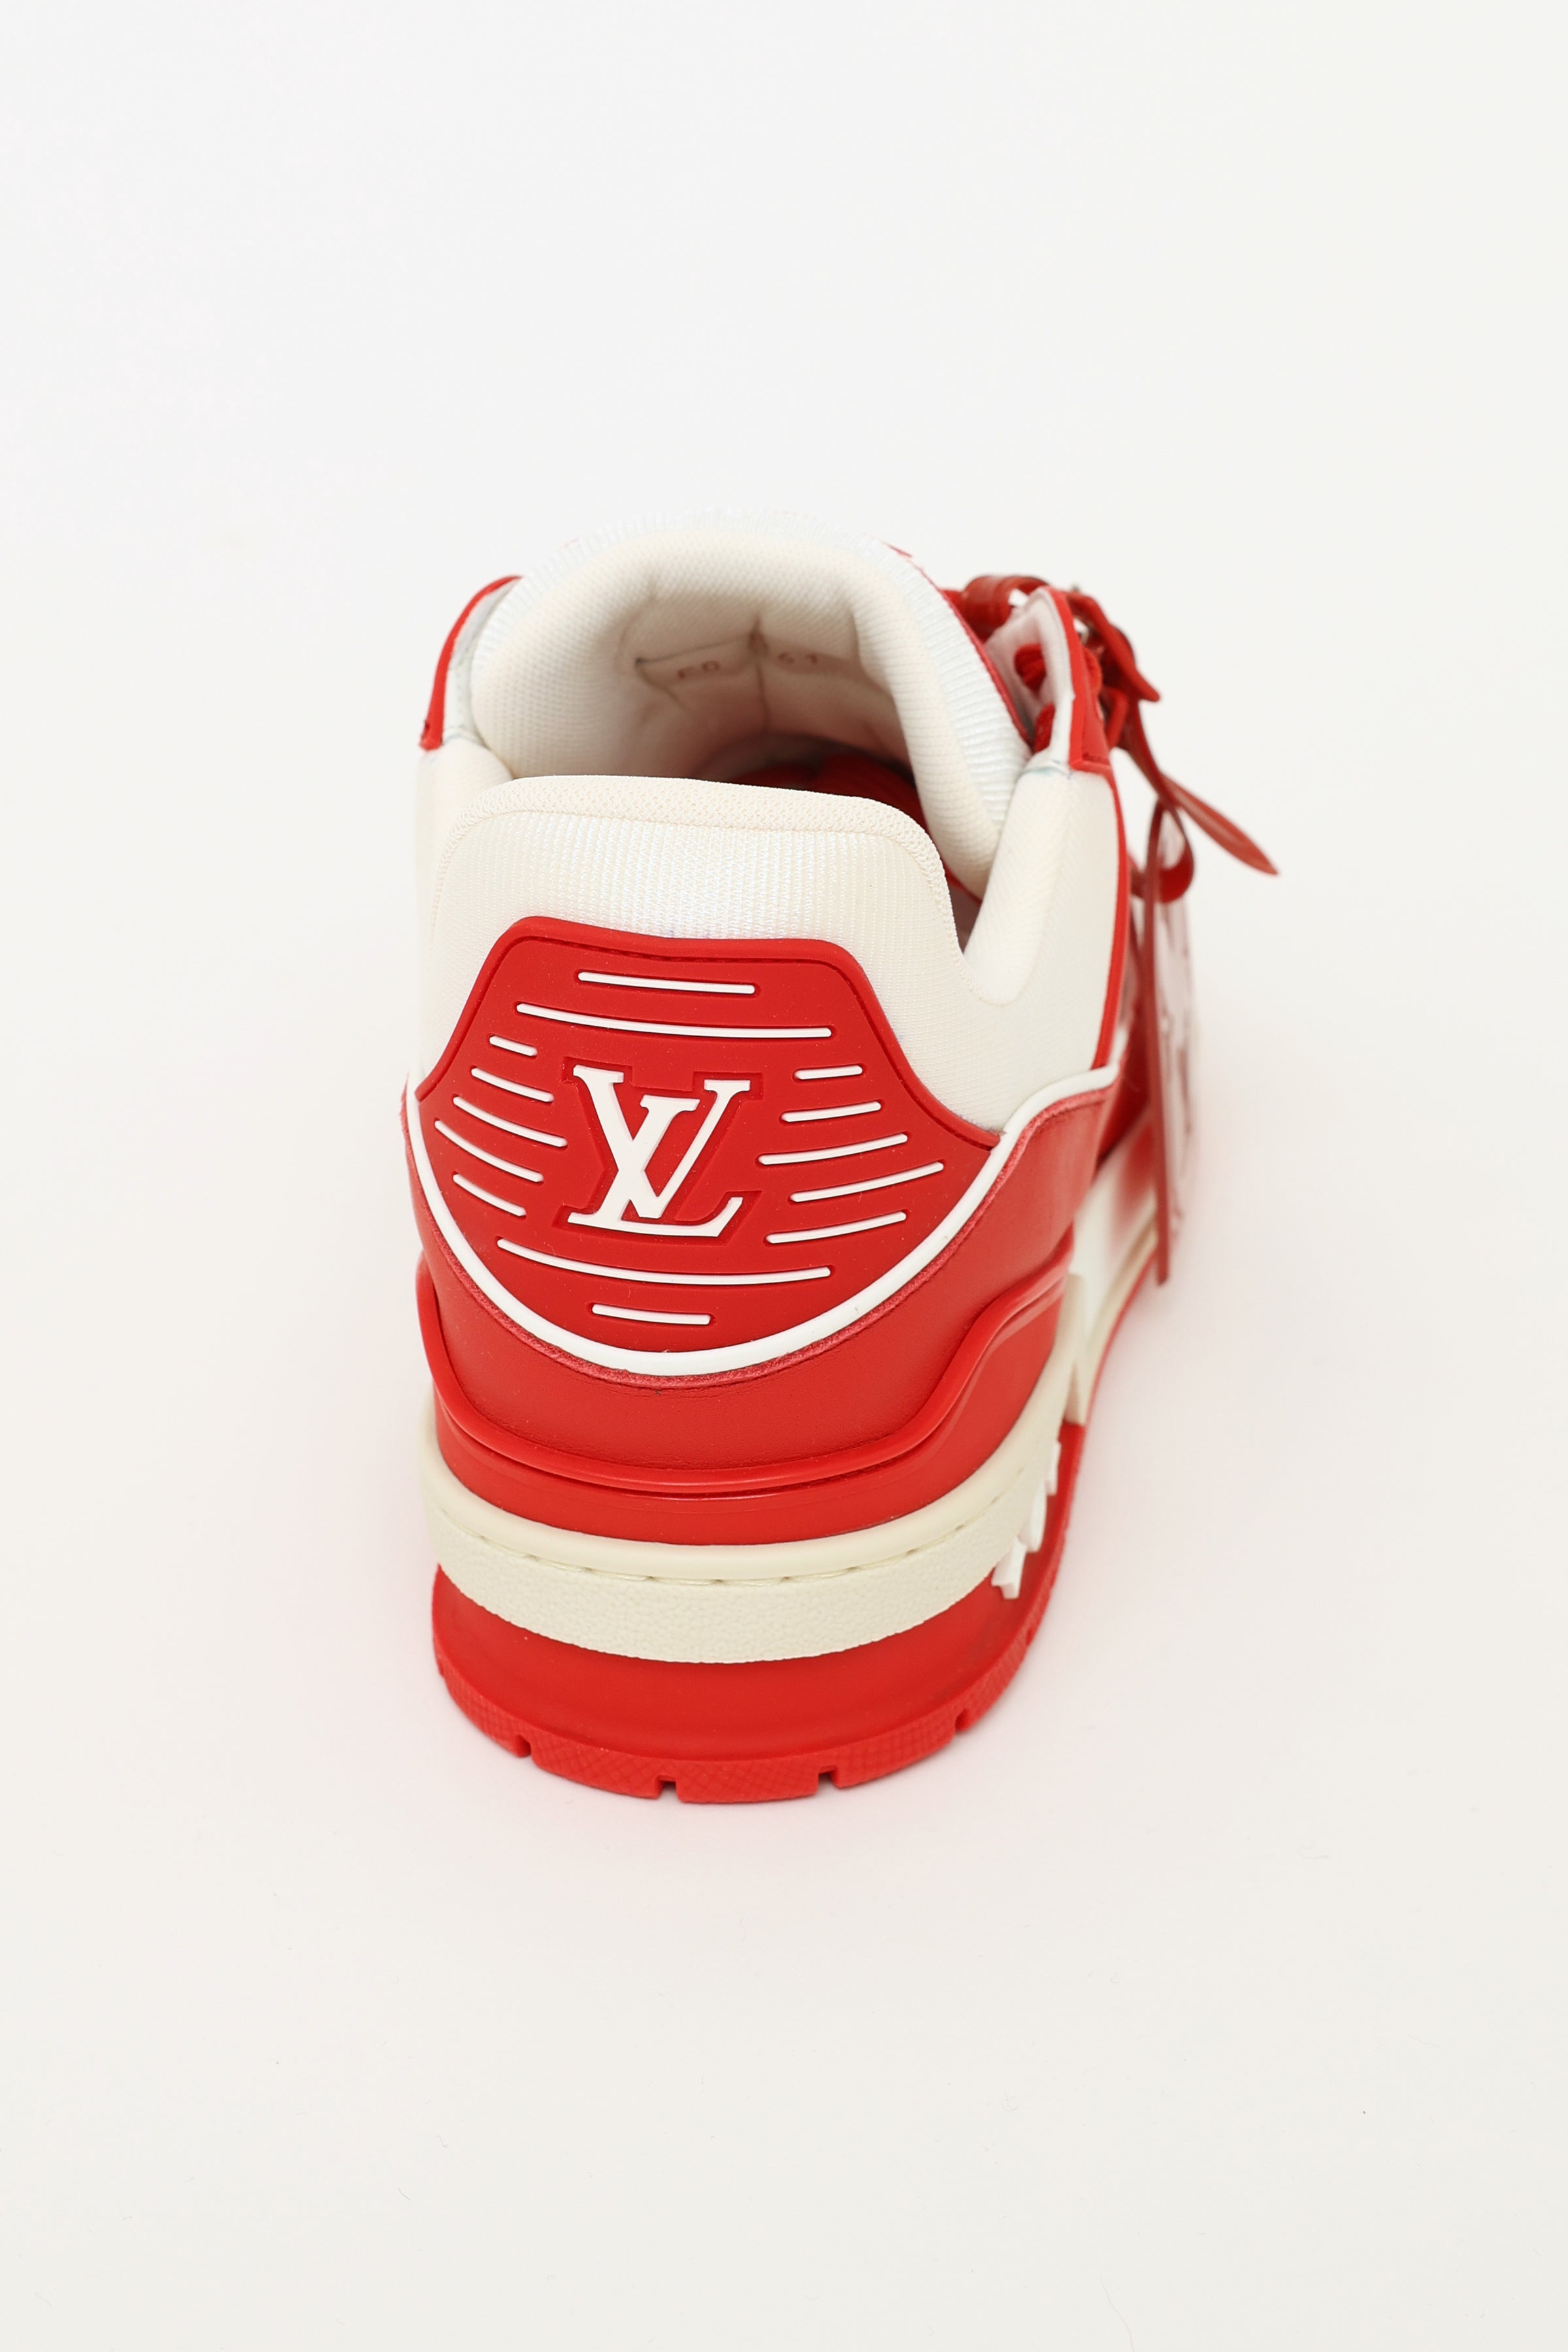 Louis Vuitton to Auction Louis Vuitton I (RED) LV Trainer Prototype at  Sotheby's — (RED)